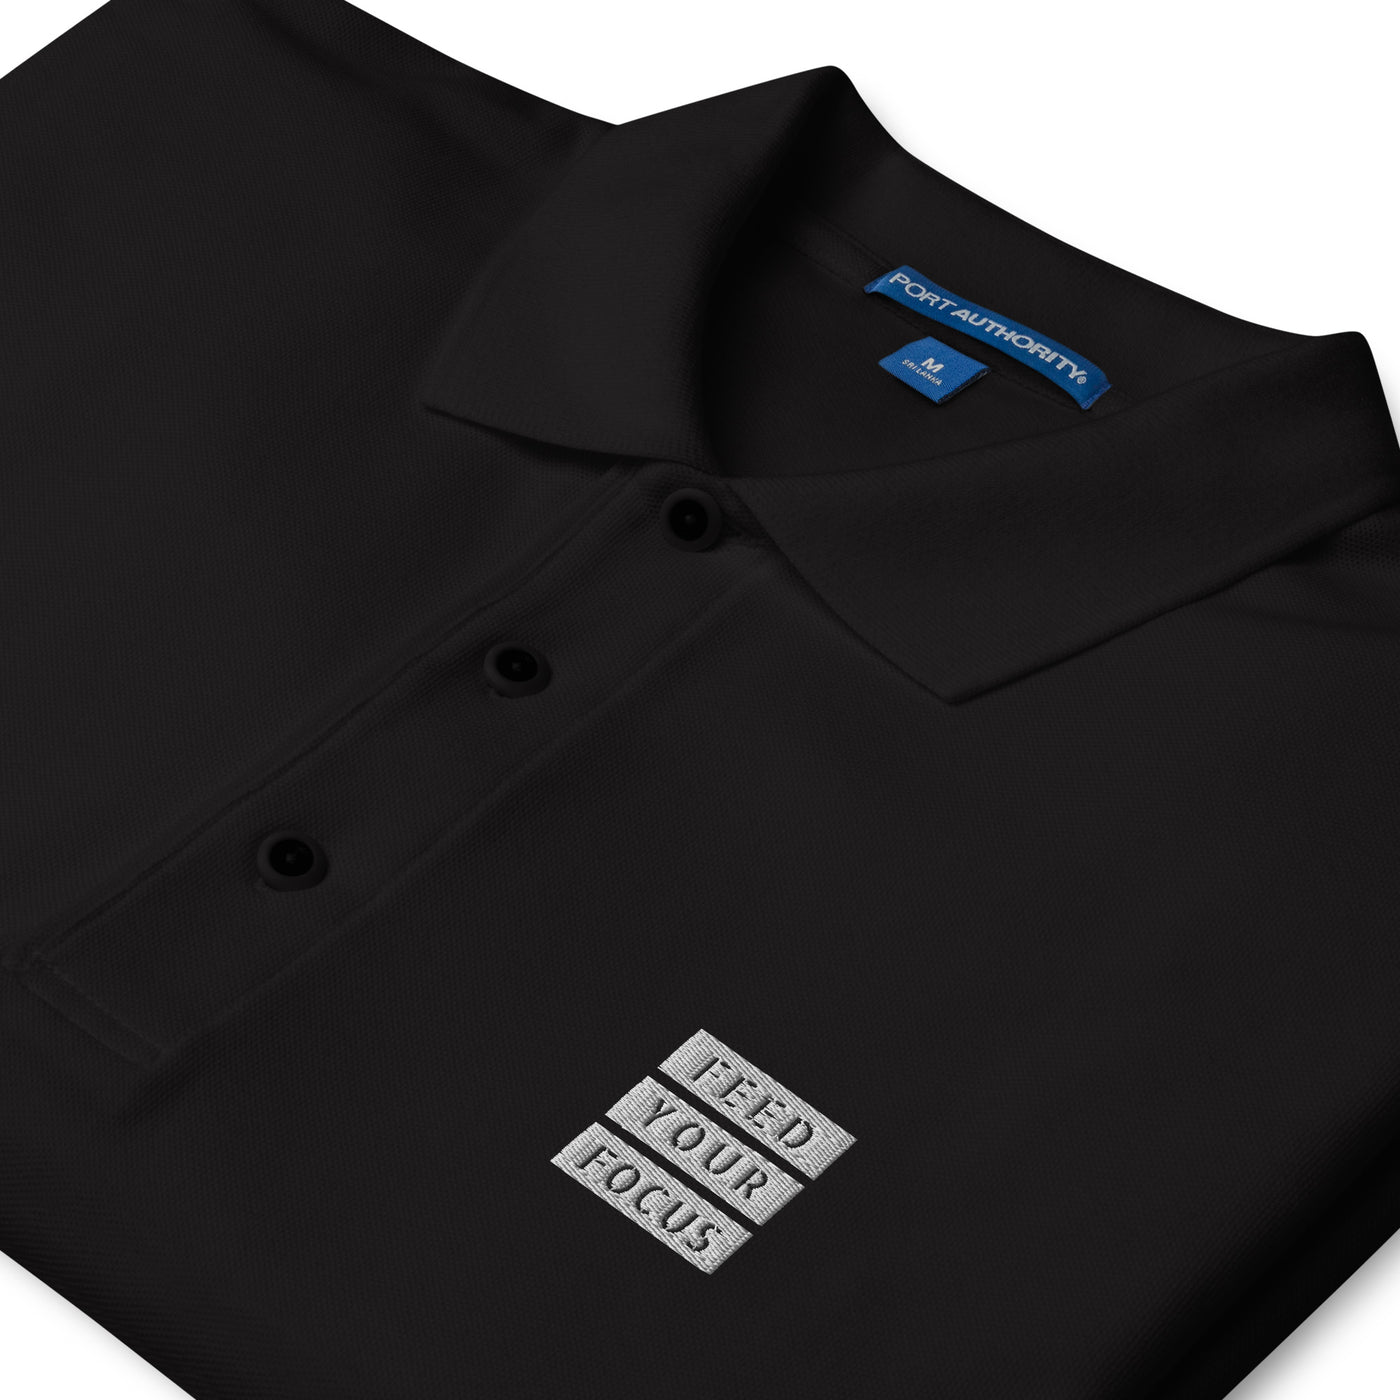 Men's Premium Embroidered Black Polo Shirt - Feed Your Focus